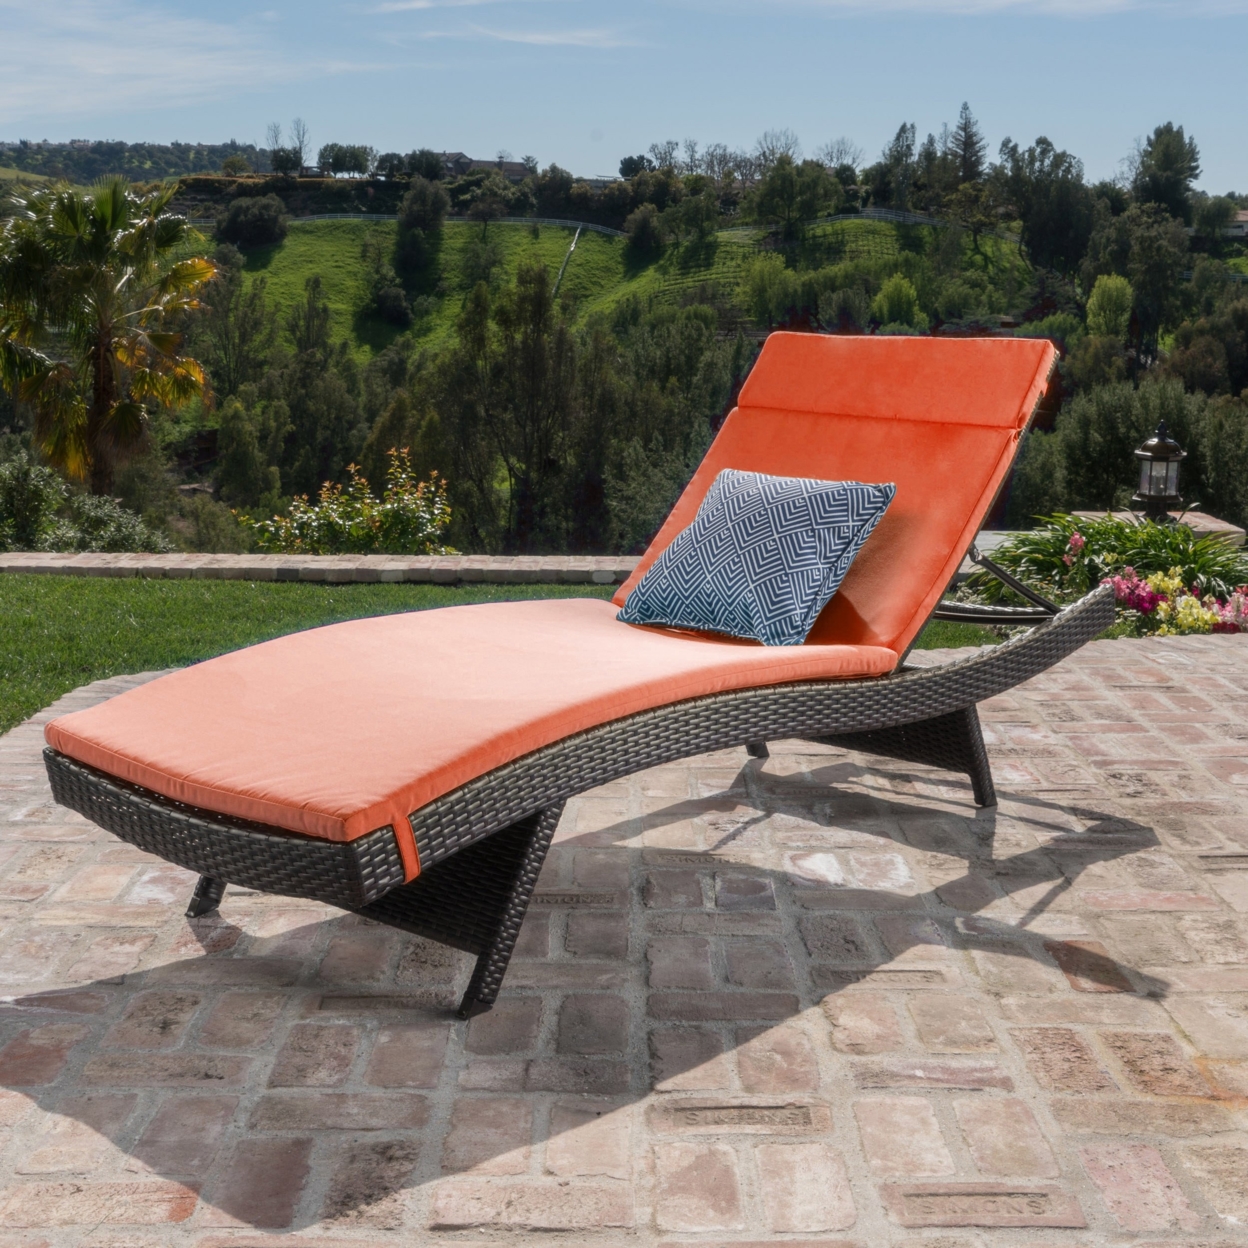 Savana Outdoor Wicker Lounge With Water Resistant Cushion - Gray/orange, Qty Of 1